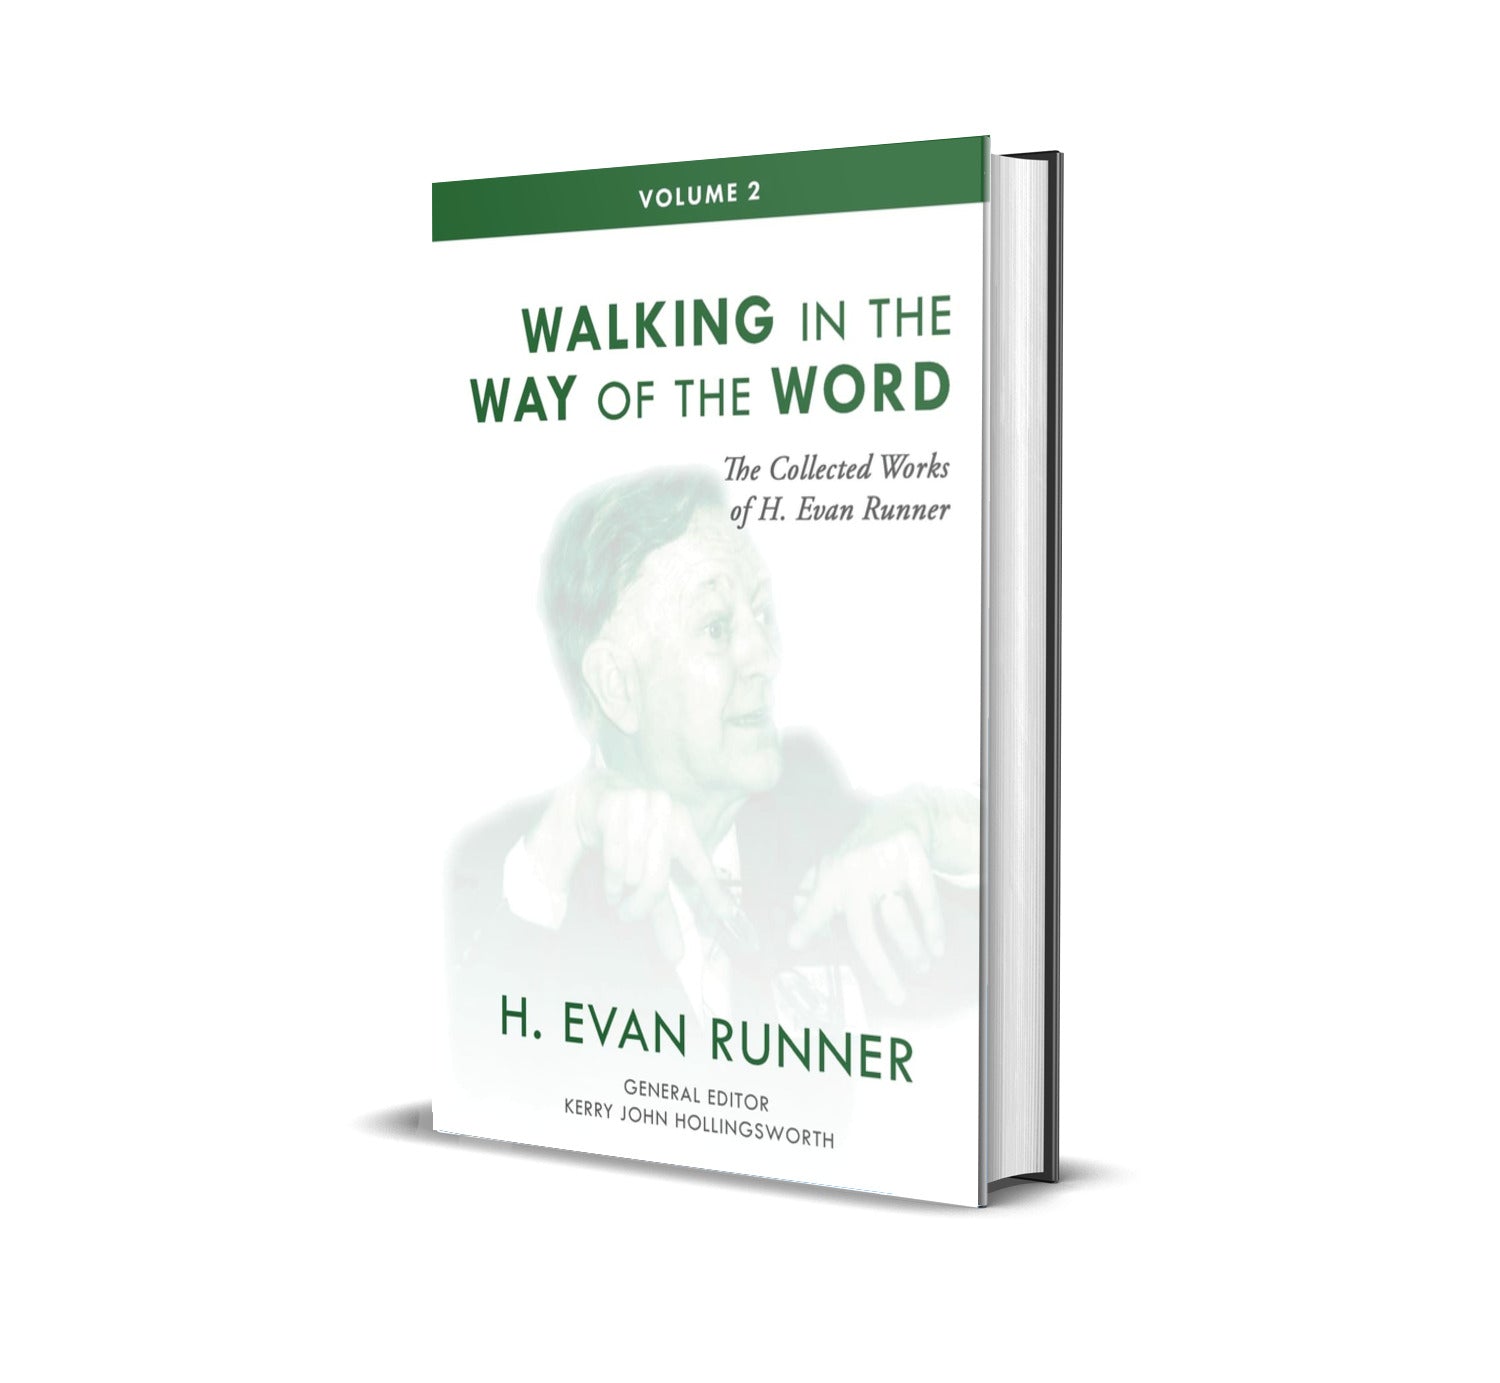 The Collected Works of H. Evan Runner, Vol. 2: Walking in the Way of the Word (Hardcover)